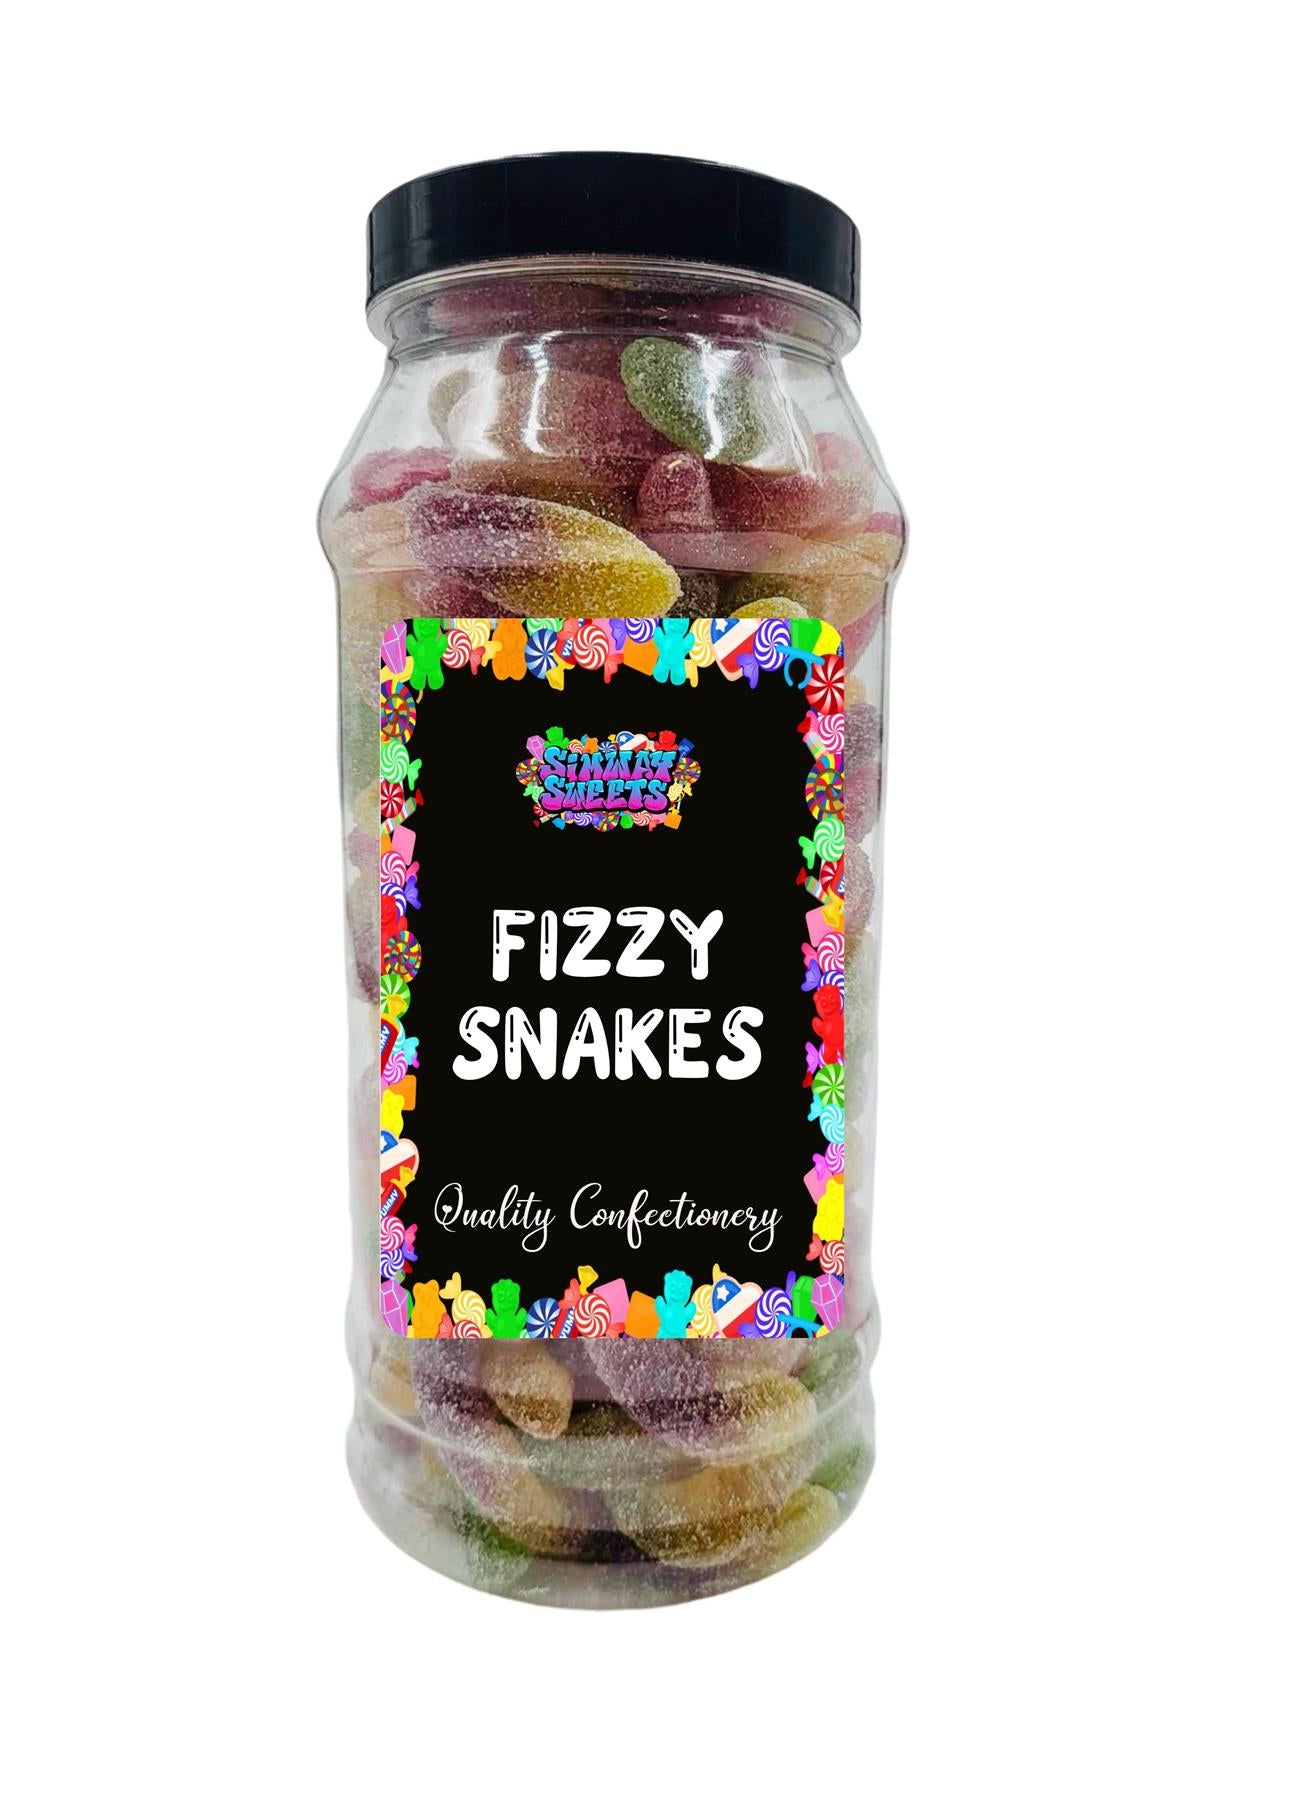 Fizzy Snakes Retro Sweets Gift Jar - 700g